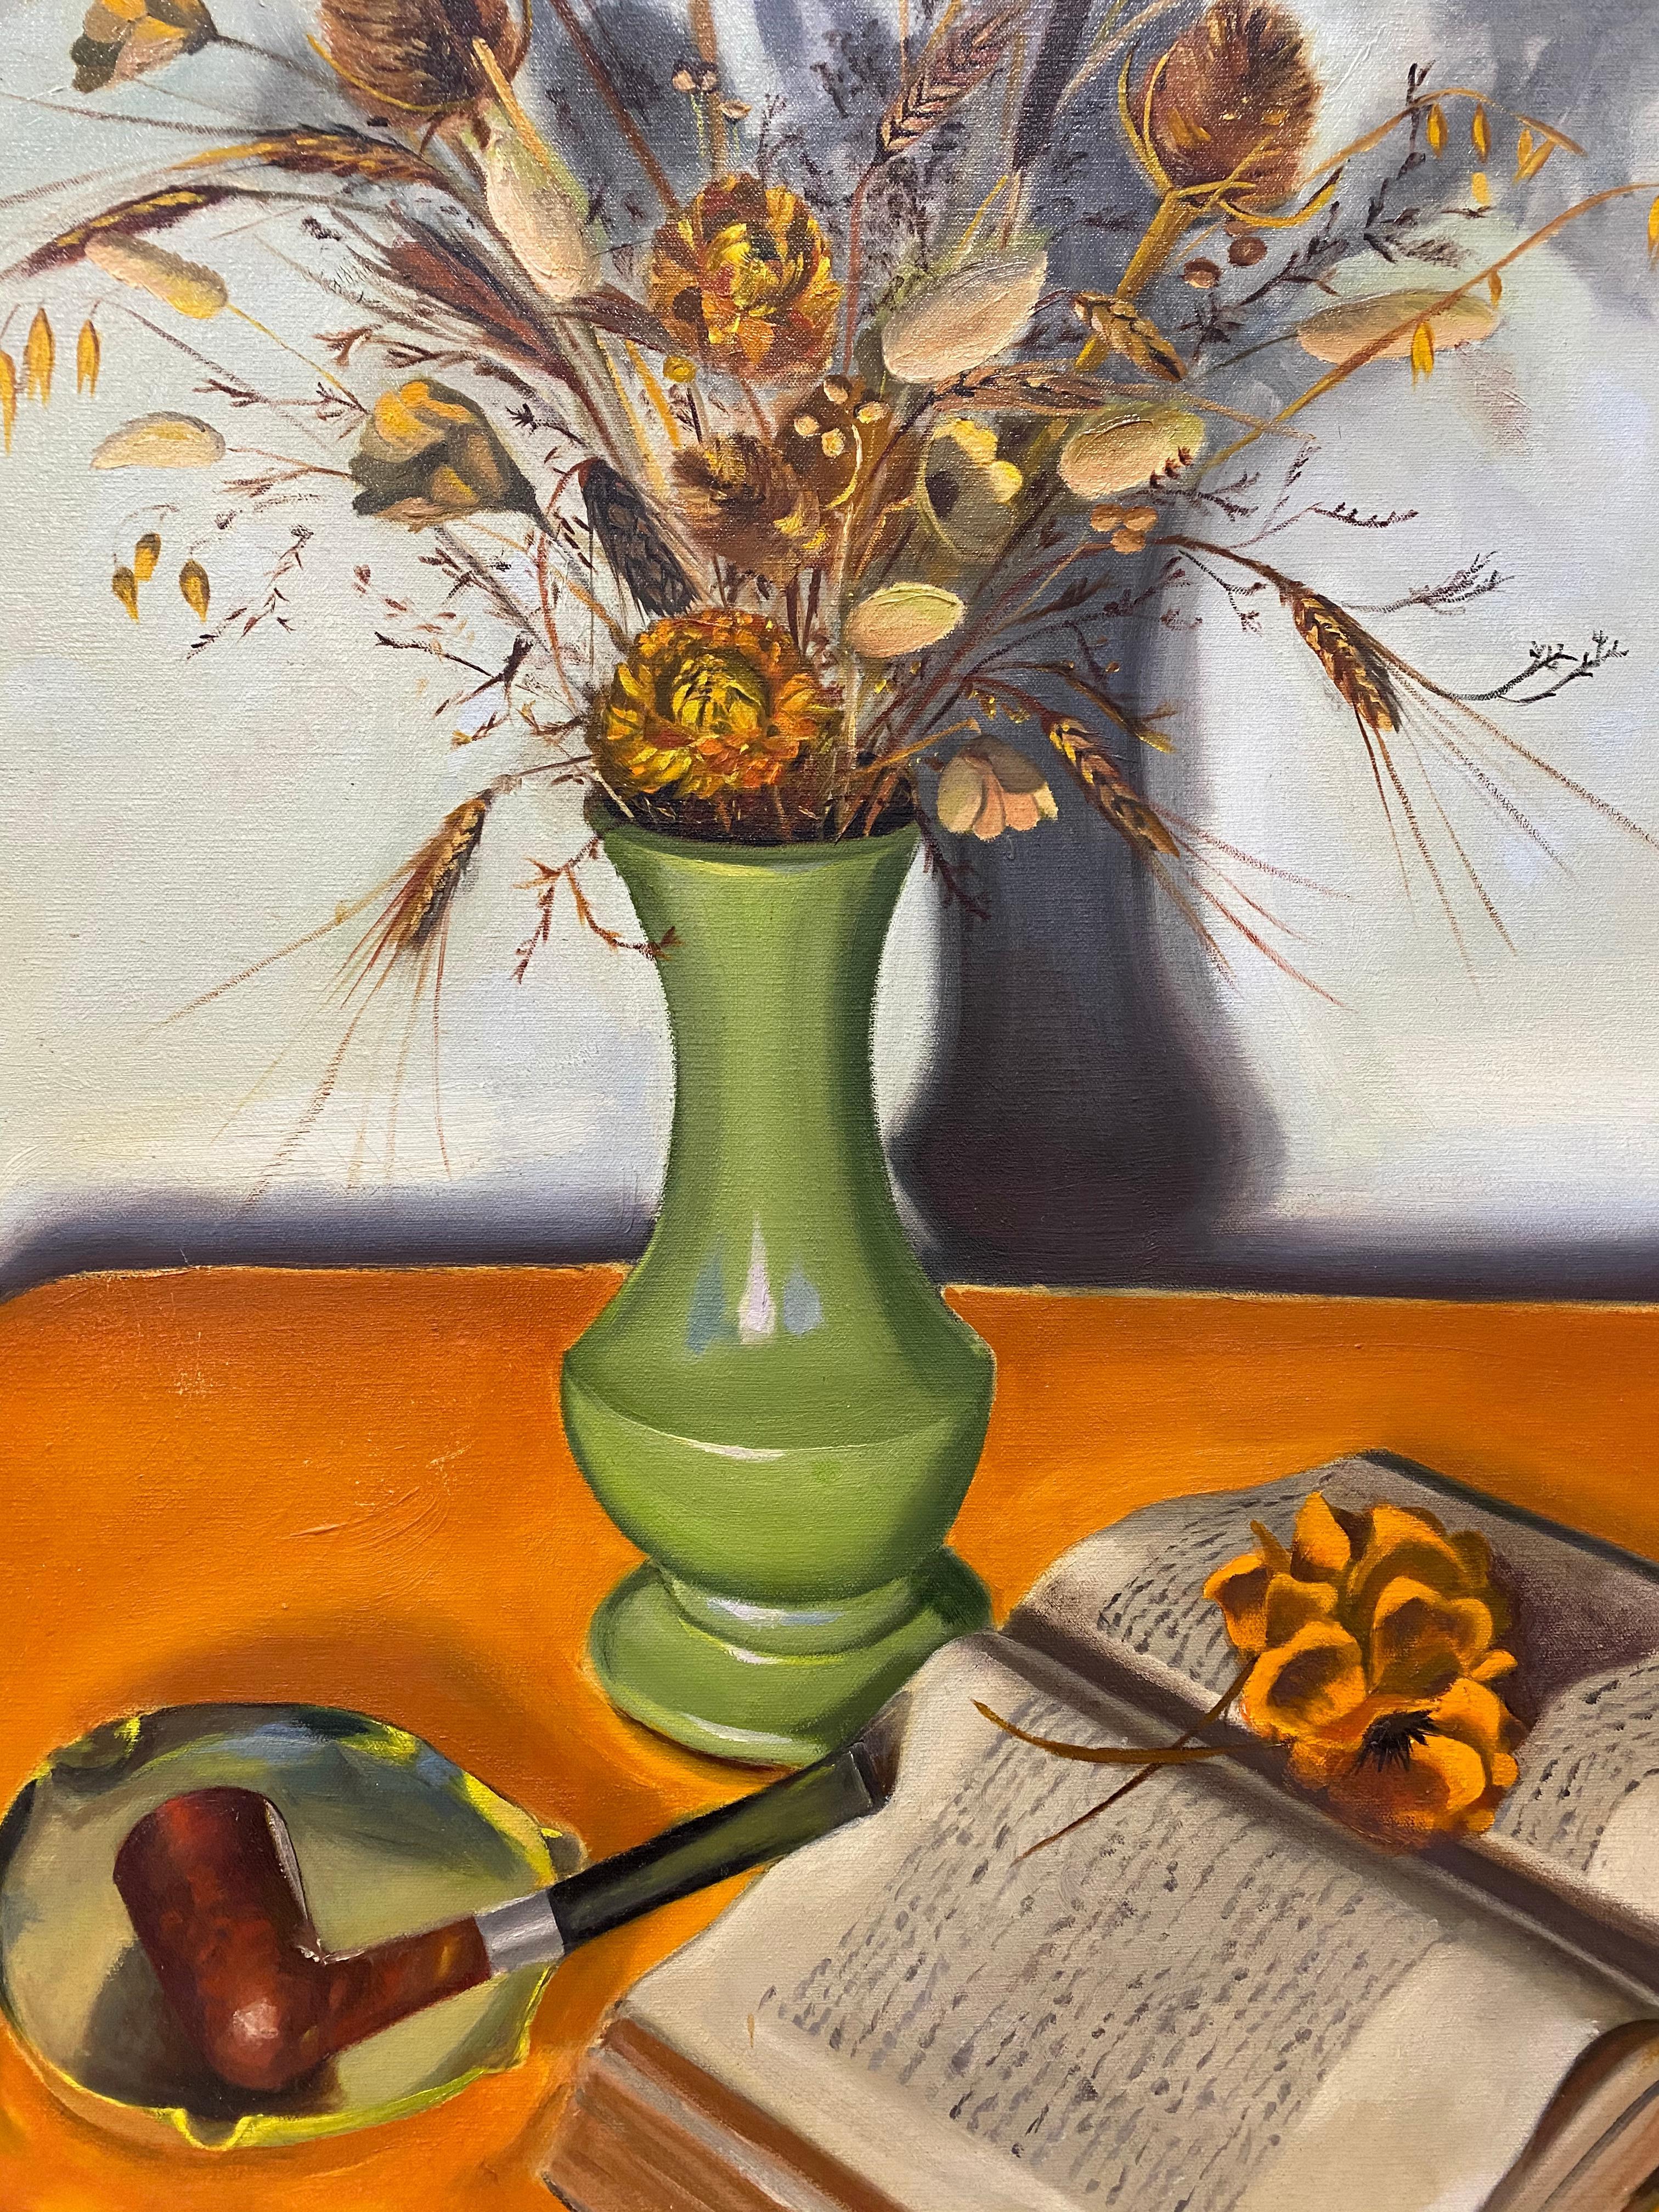 Vintage Still Life Oil Painting With Dried Flowers in a Green Vase by J. Viola C For Sale 3